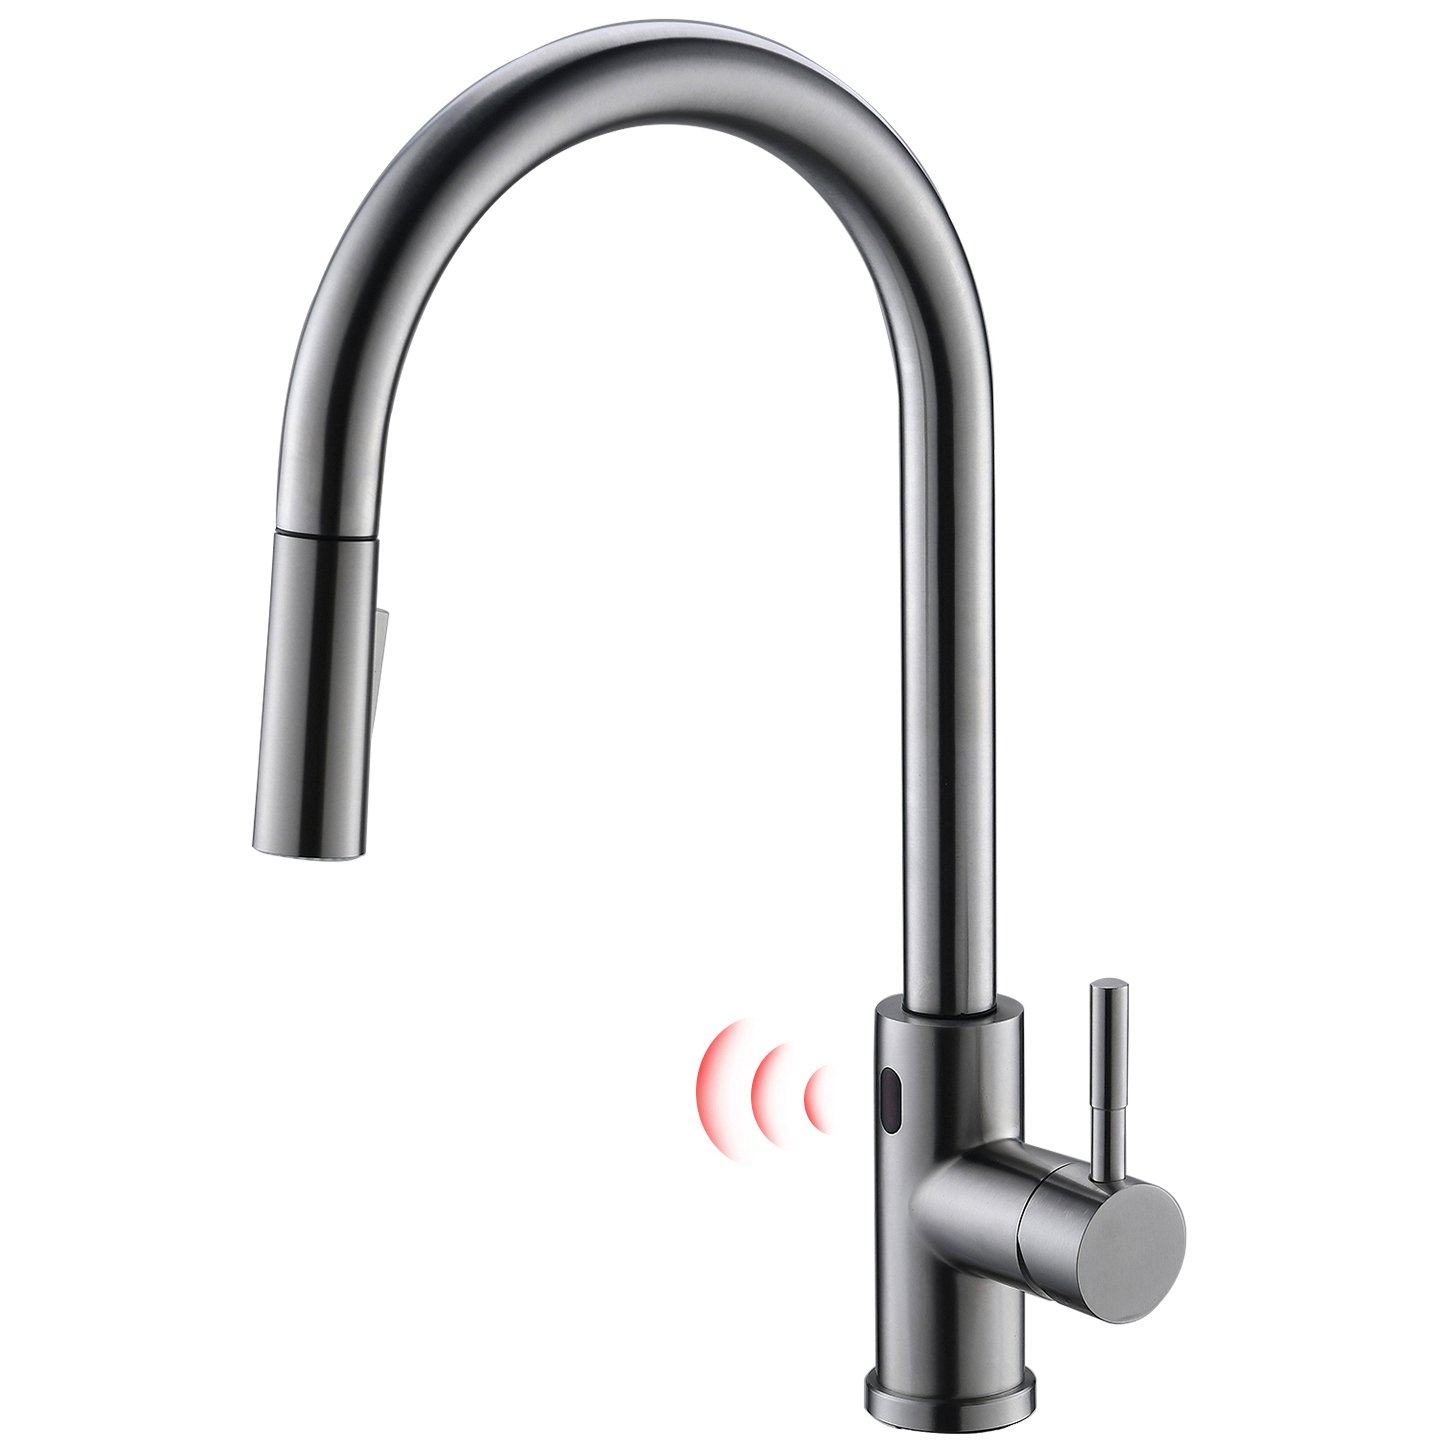 CASAINC Single-Handle Touchless Pull-Out Sprayer Kitchen Faucet with Water Supply Lines in Brushed Nickel( Deckplate and Batteries Not Included )-CASAINC